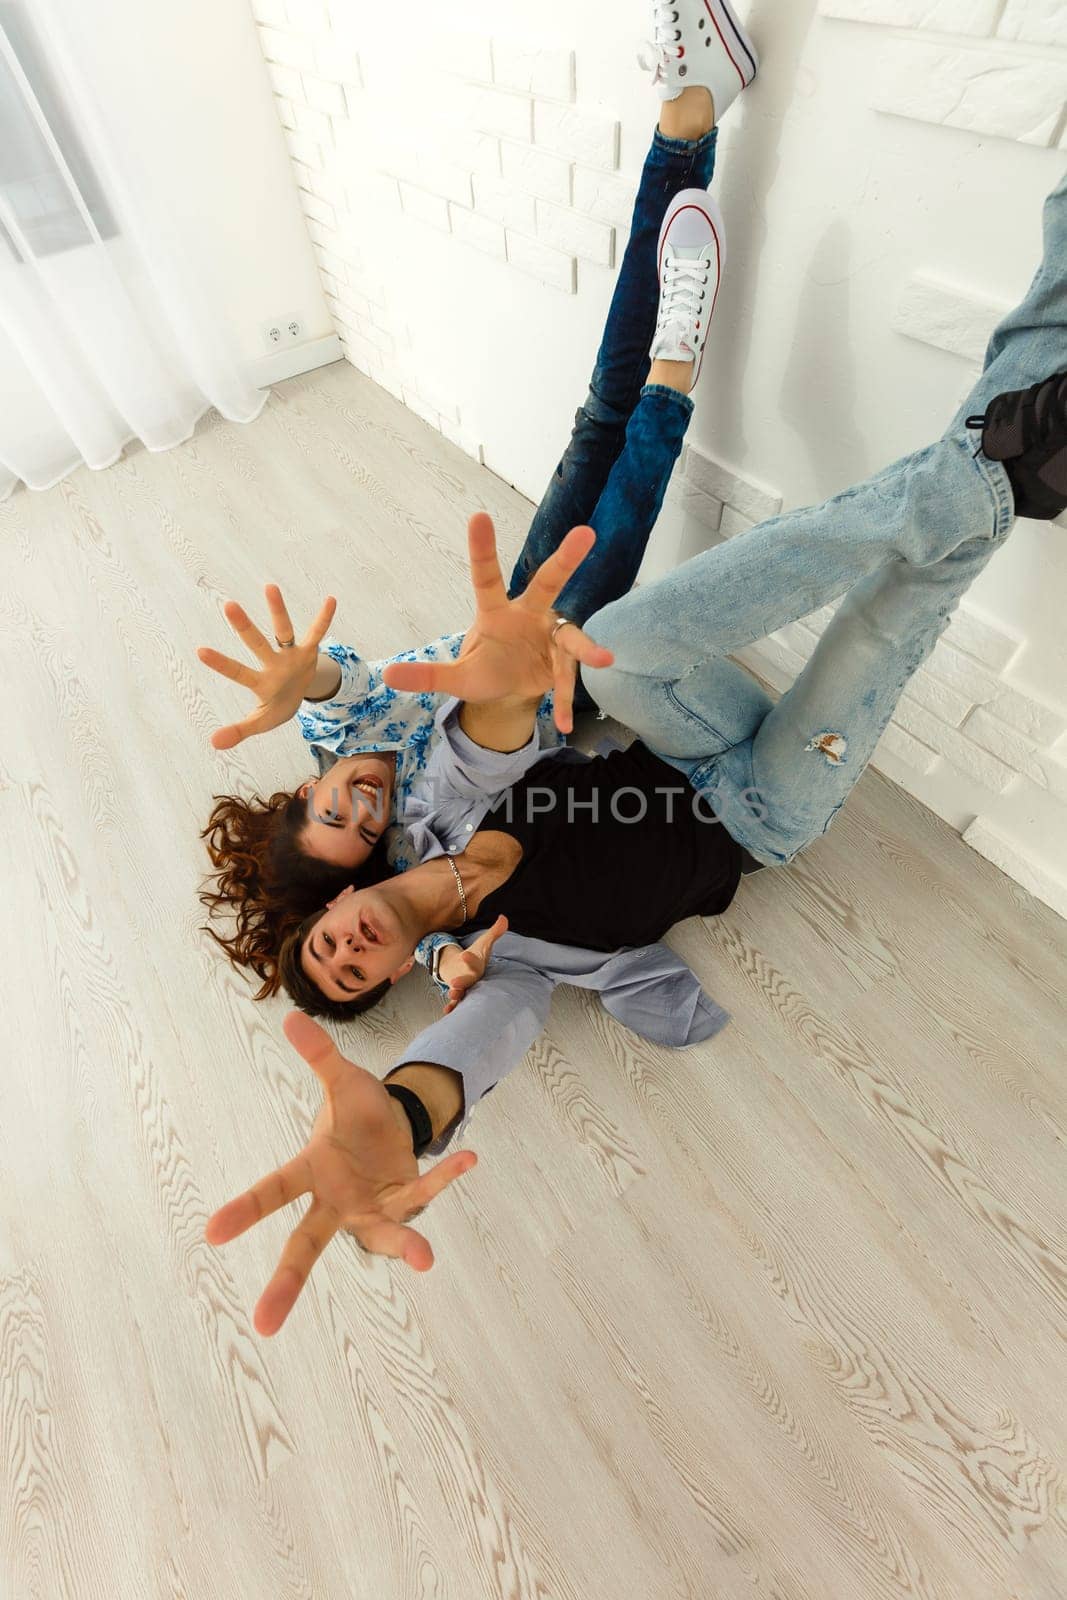 Young couple fooling around indoors.